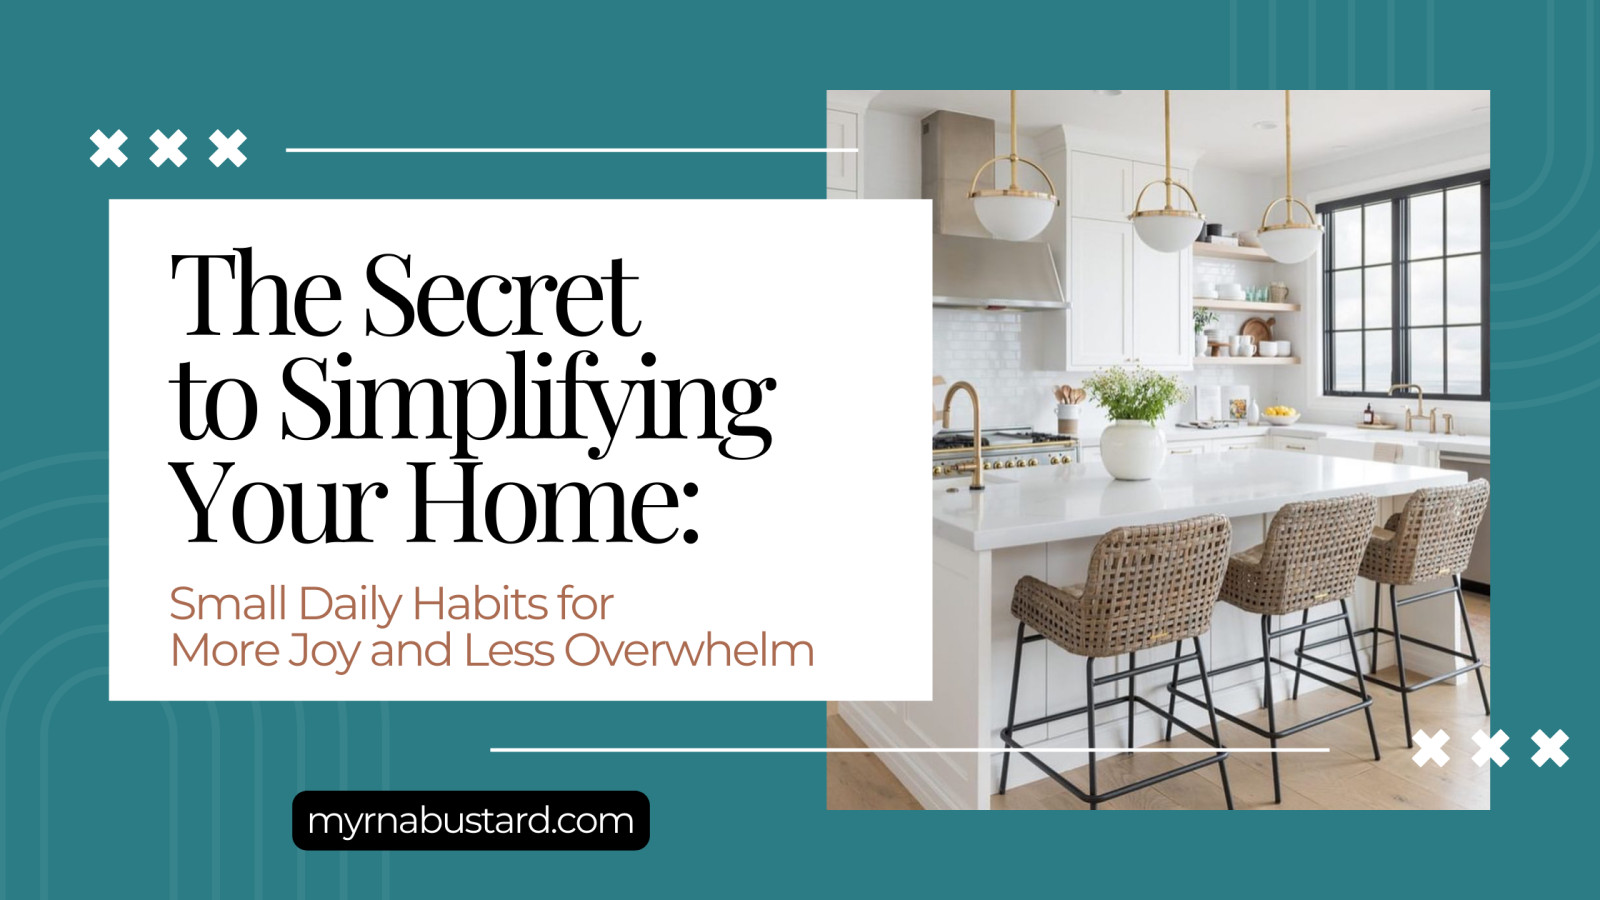 The Secret to Simplifying Your Home